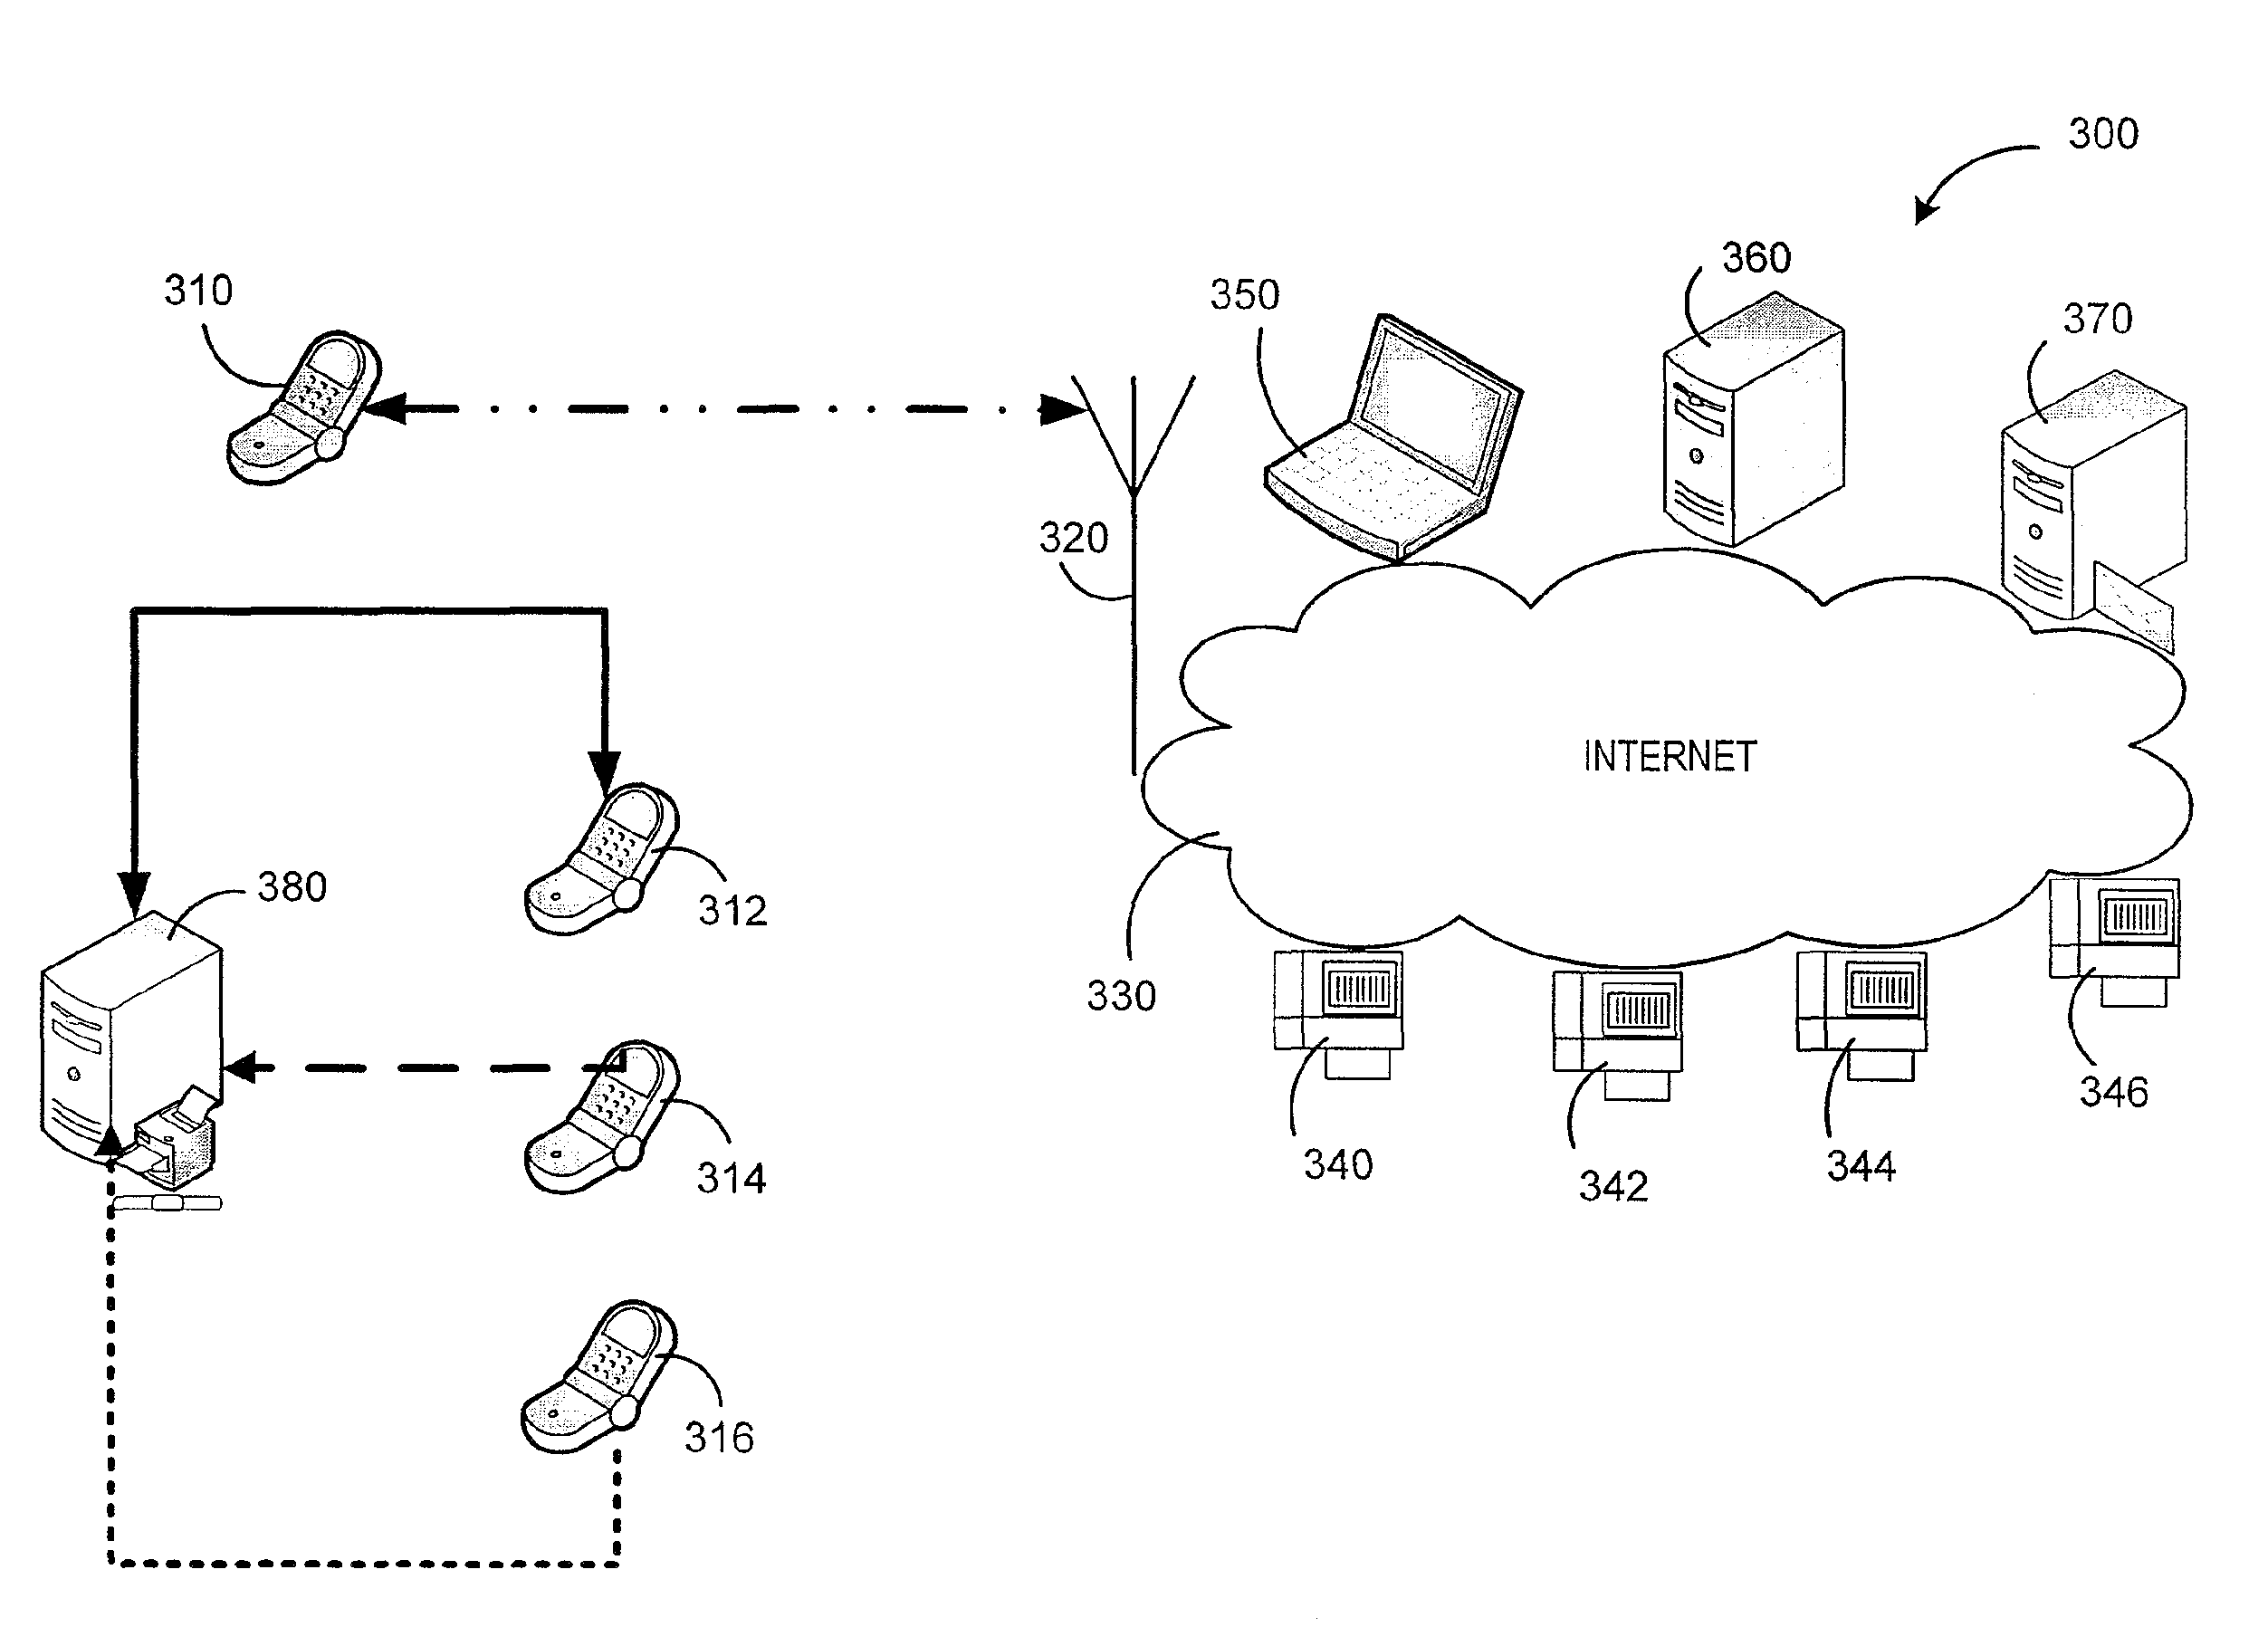 Method and system for producing hard copies of electronic information employing a portable personal receiving device